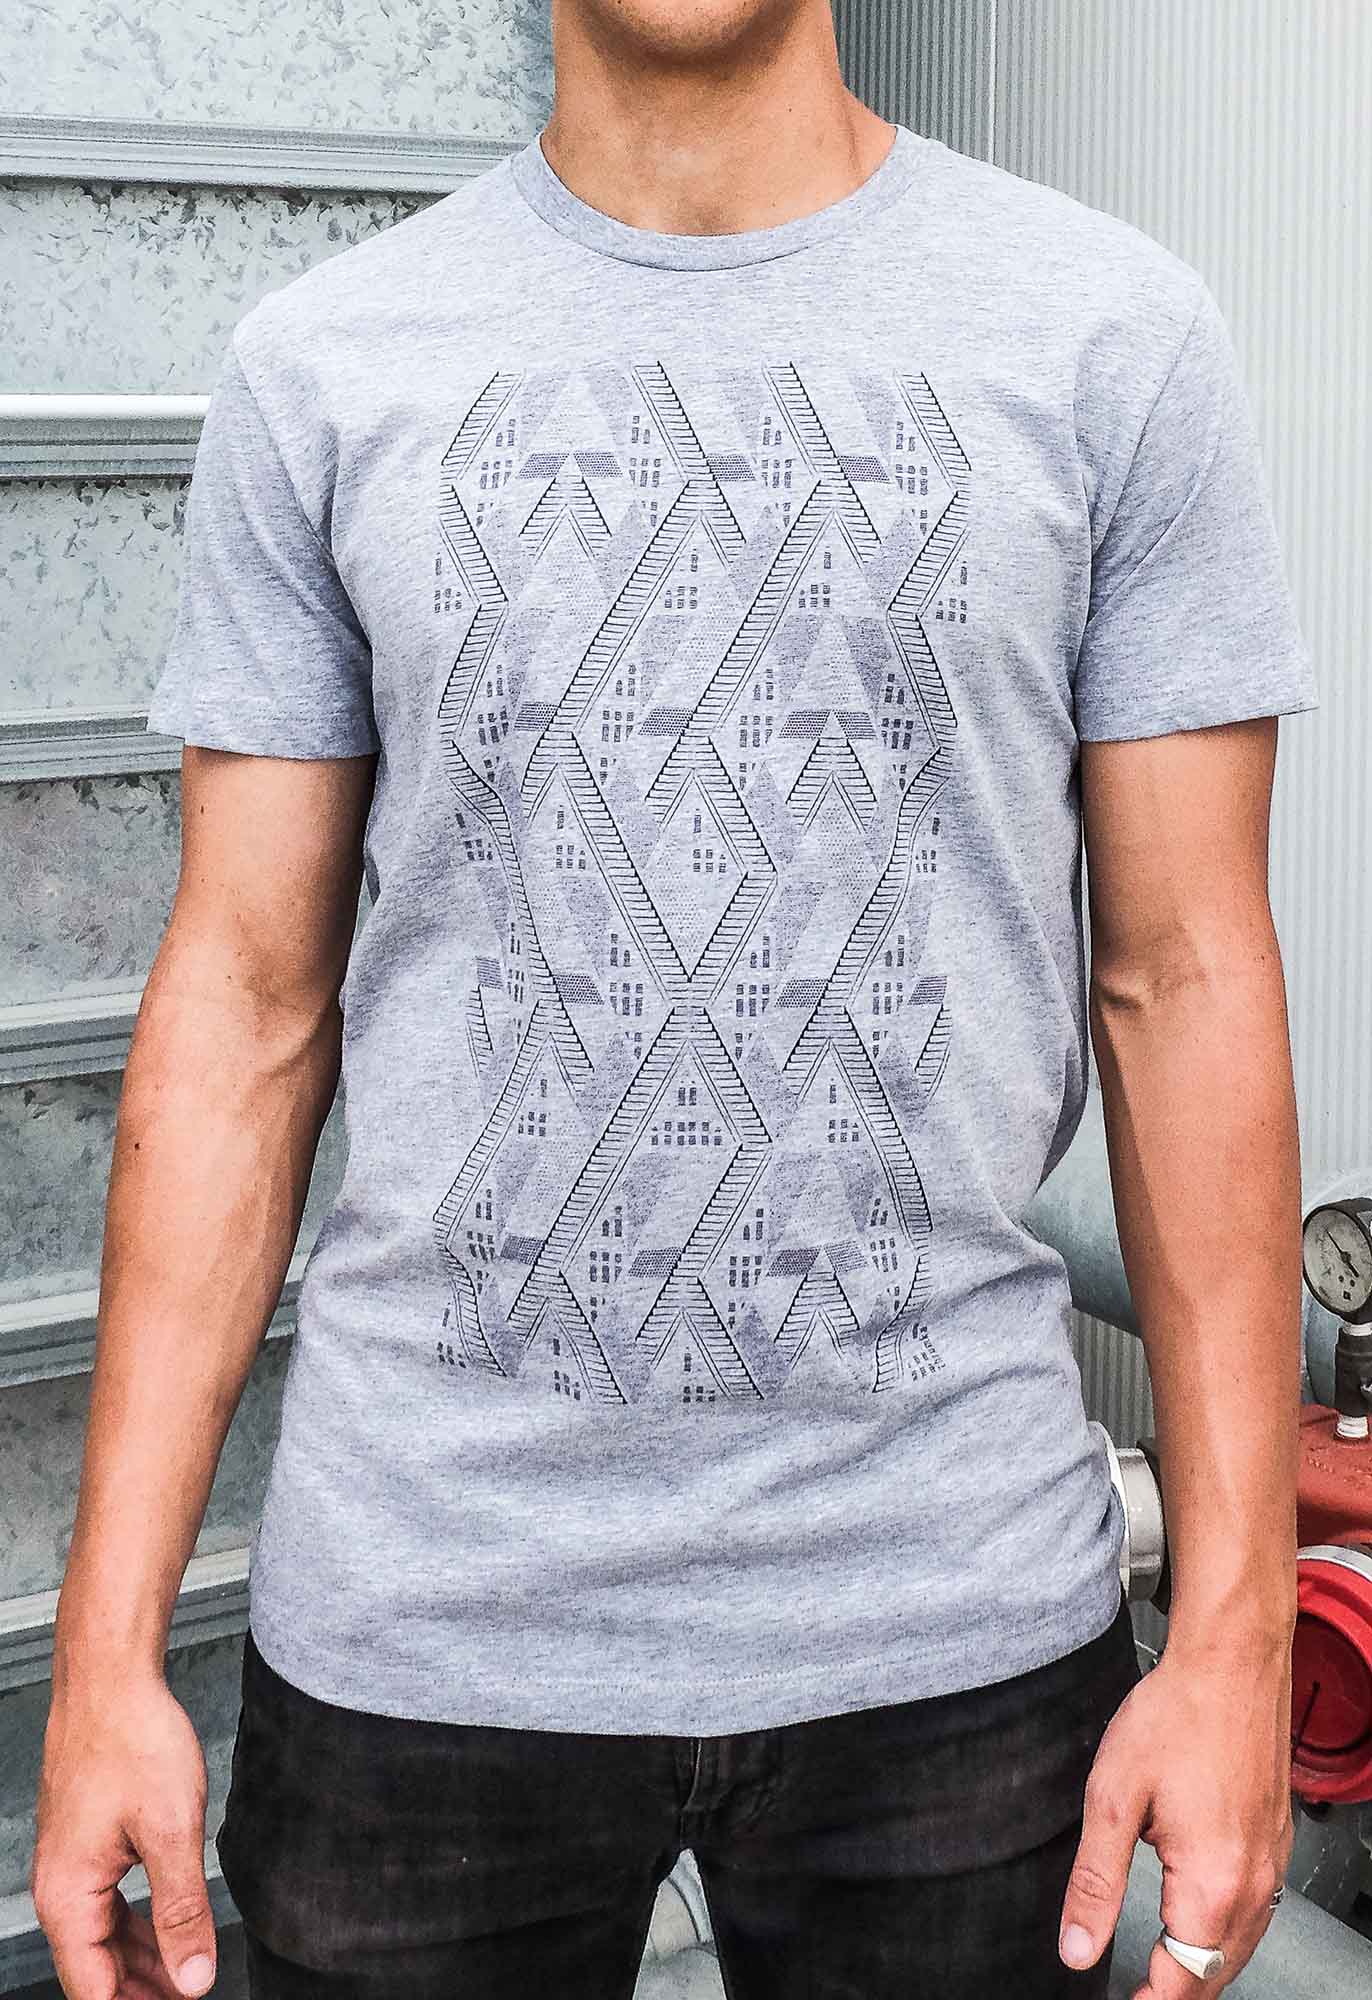 Stairs to Nowhere T-Shirt - Grey Marle